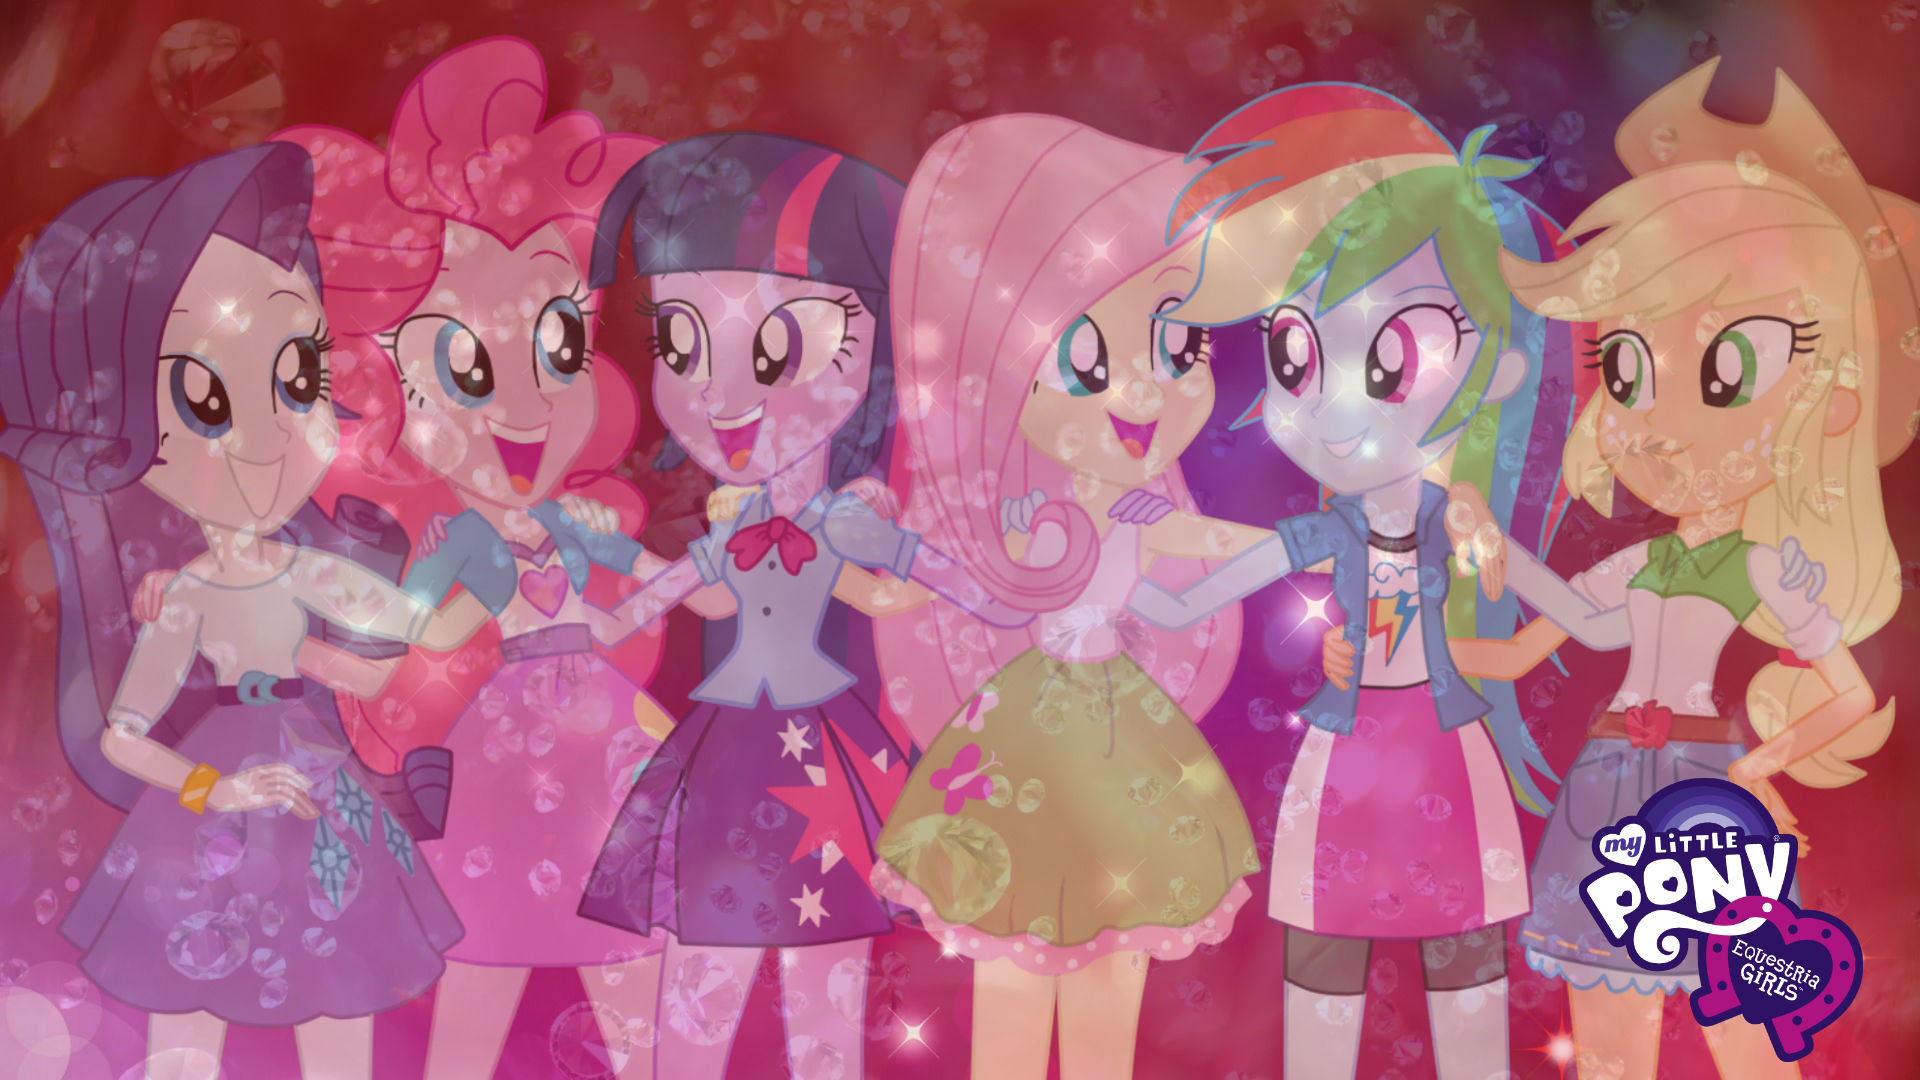 1920x1080 ... My Little Pony Equestria Girls Wallpaper by Infantry00